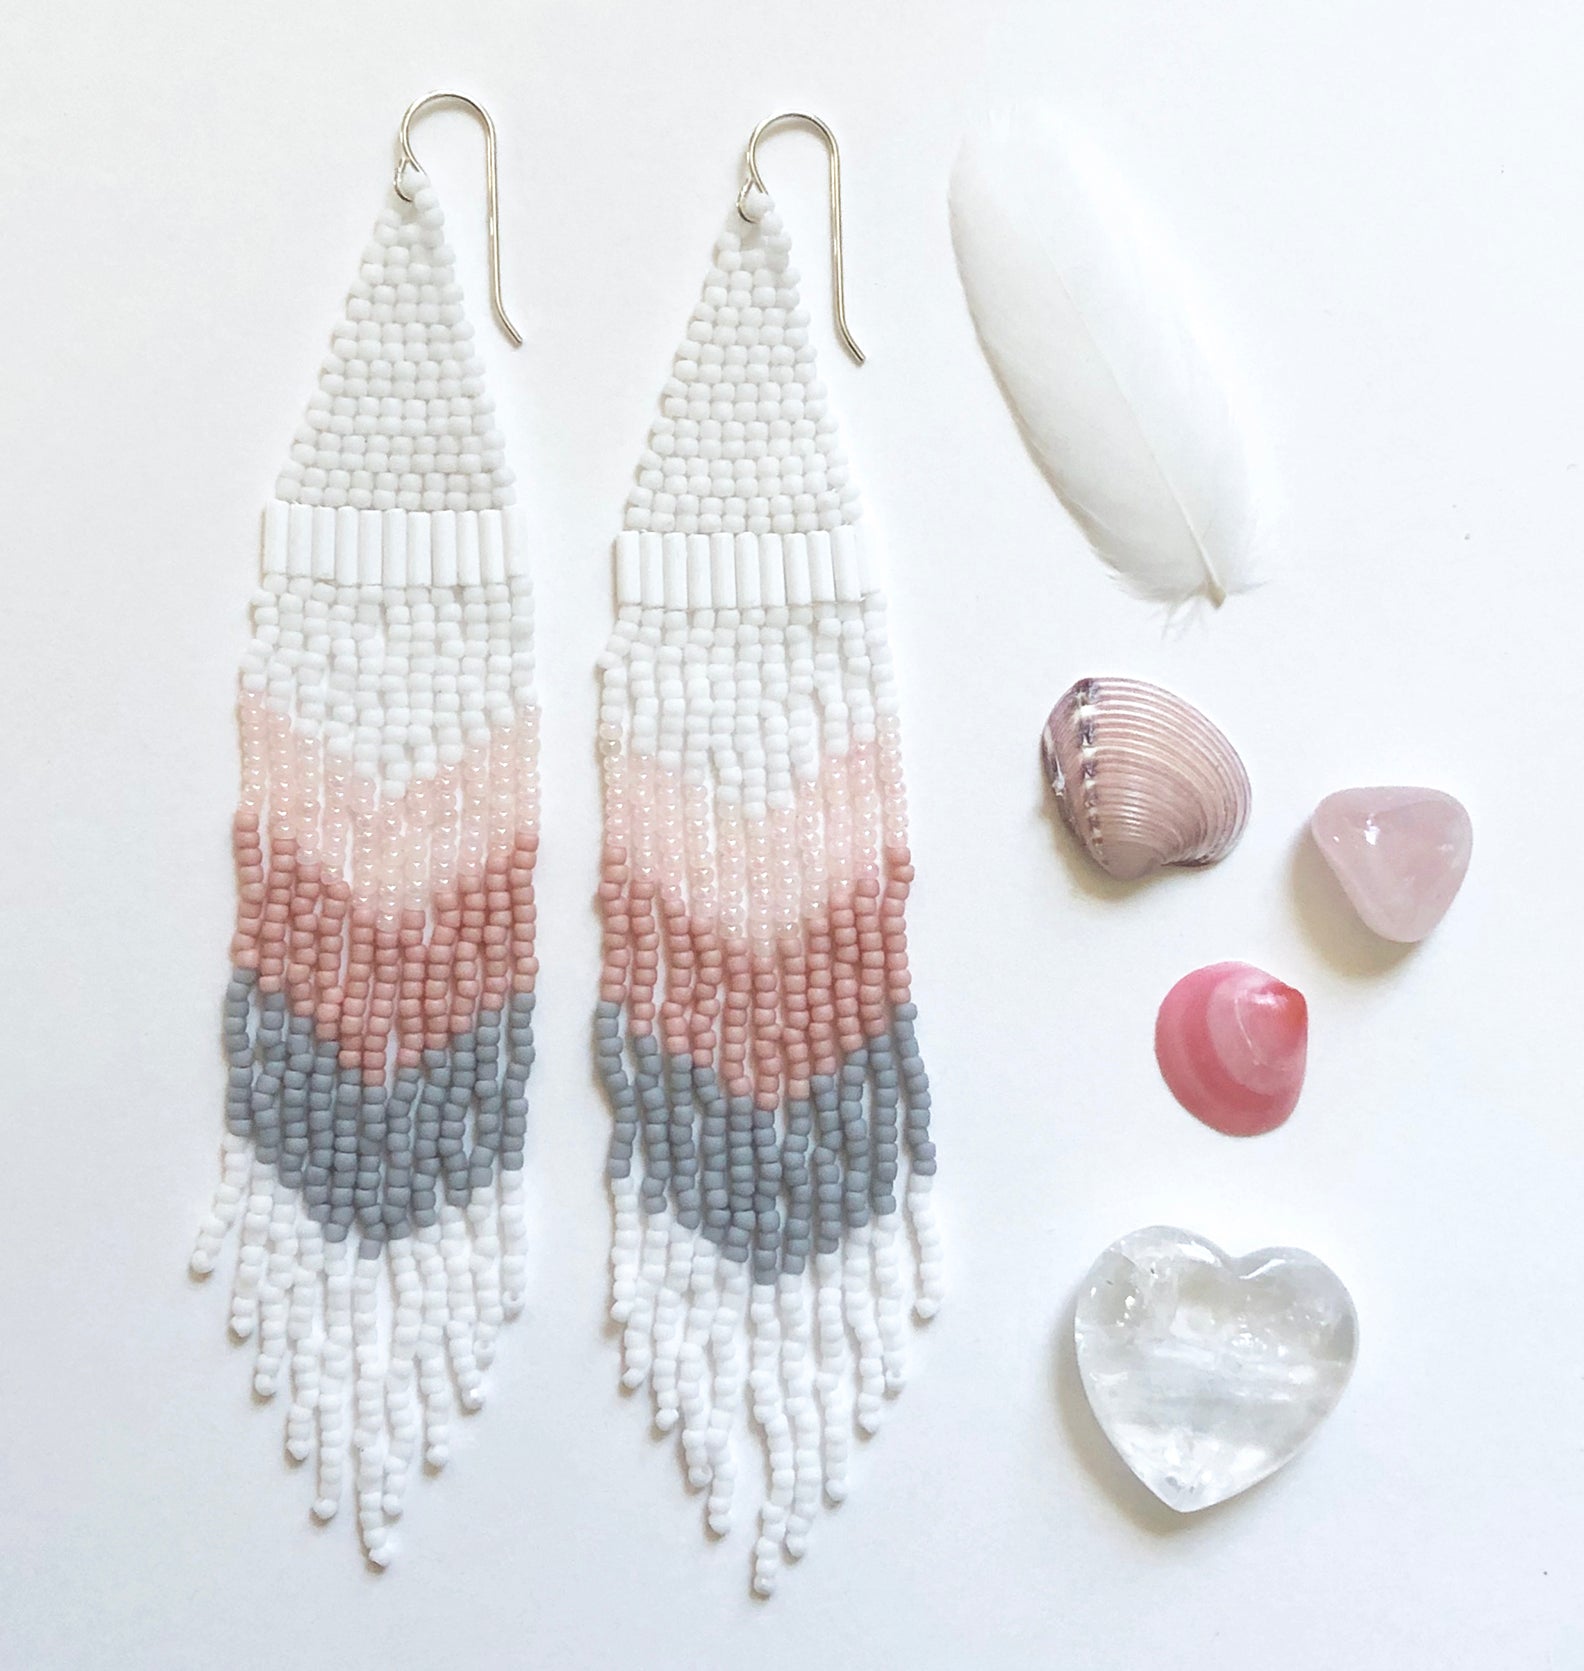 Extra long Handmade Seed Bead Fringe Earrings in chevron pattern with shimmering blush vintage beads and matte white gray and pink. 